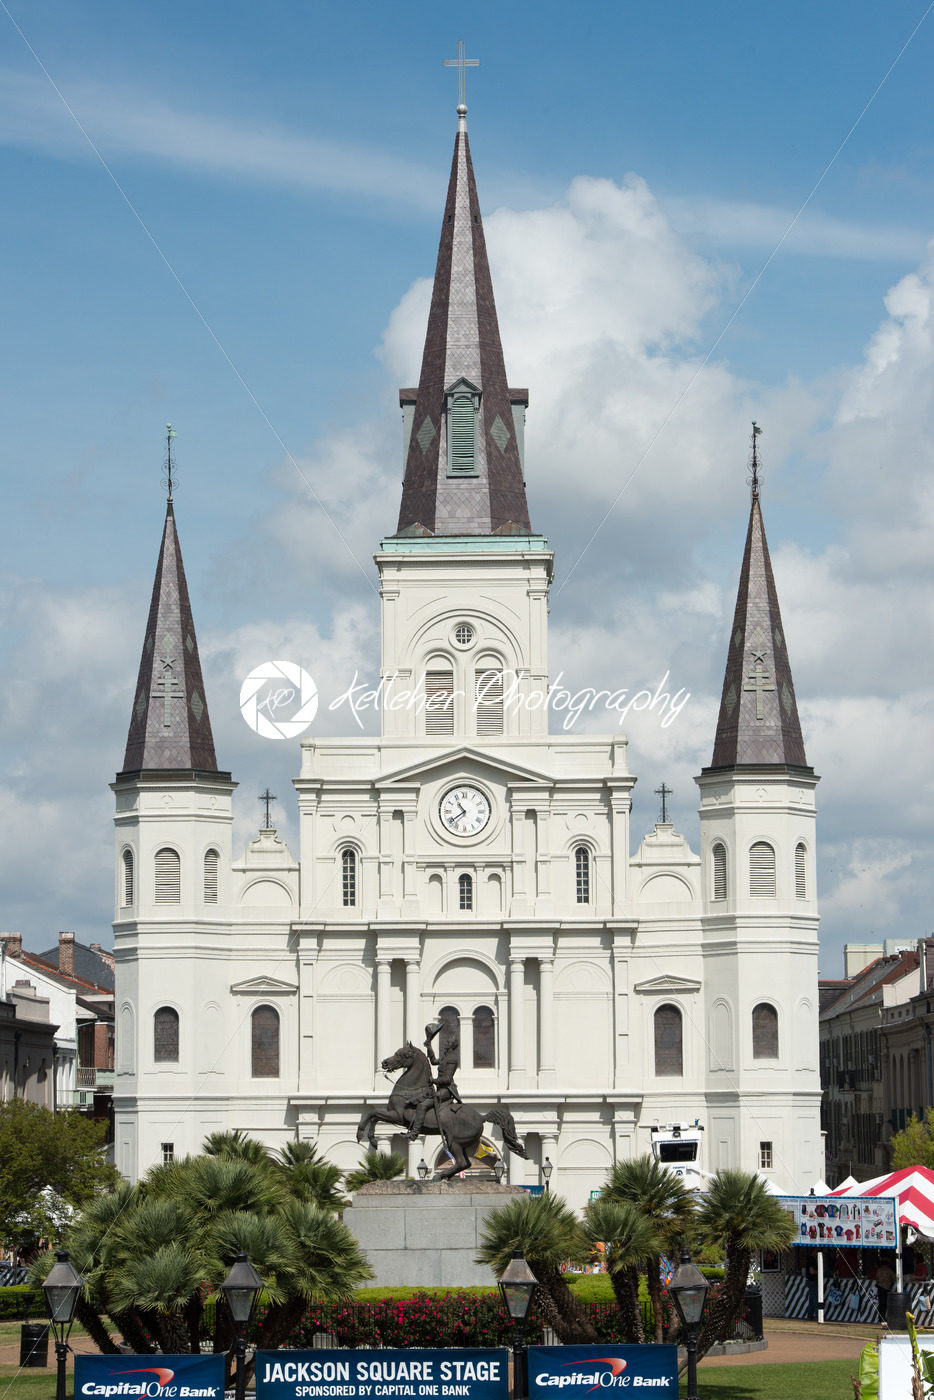 NEW ORLEANS, LA – APRIL 13: Beautiful architecture of Cathedral Basilica of Saint Louis in Jackson Square, New Orleans, LA on April 13, 2014 - Kelleher Photography Store